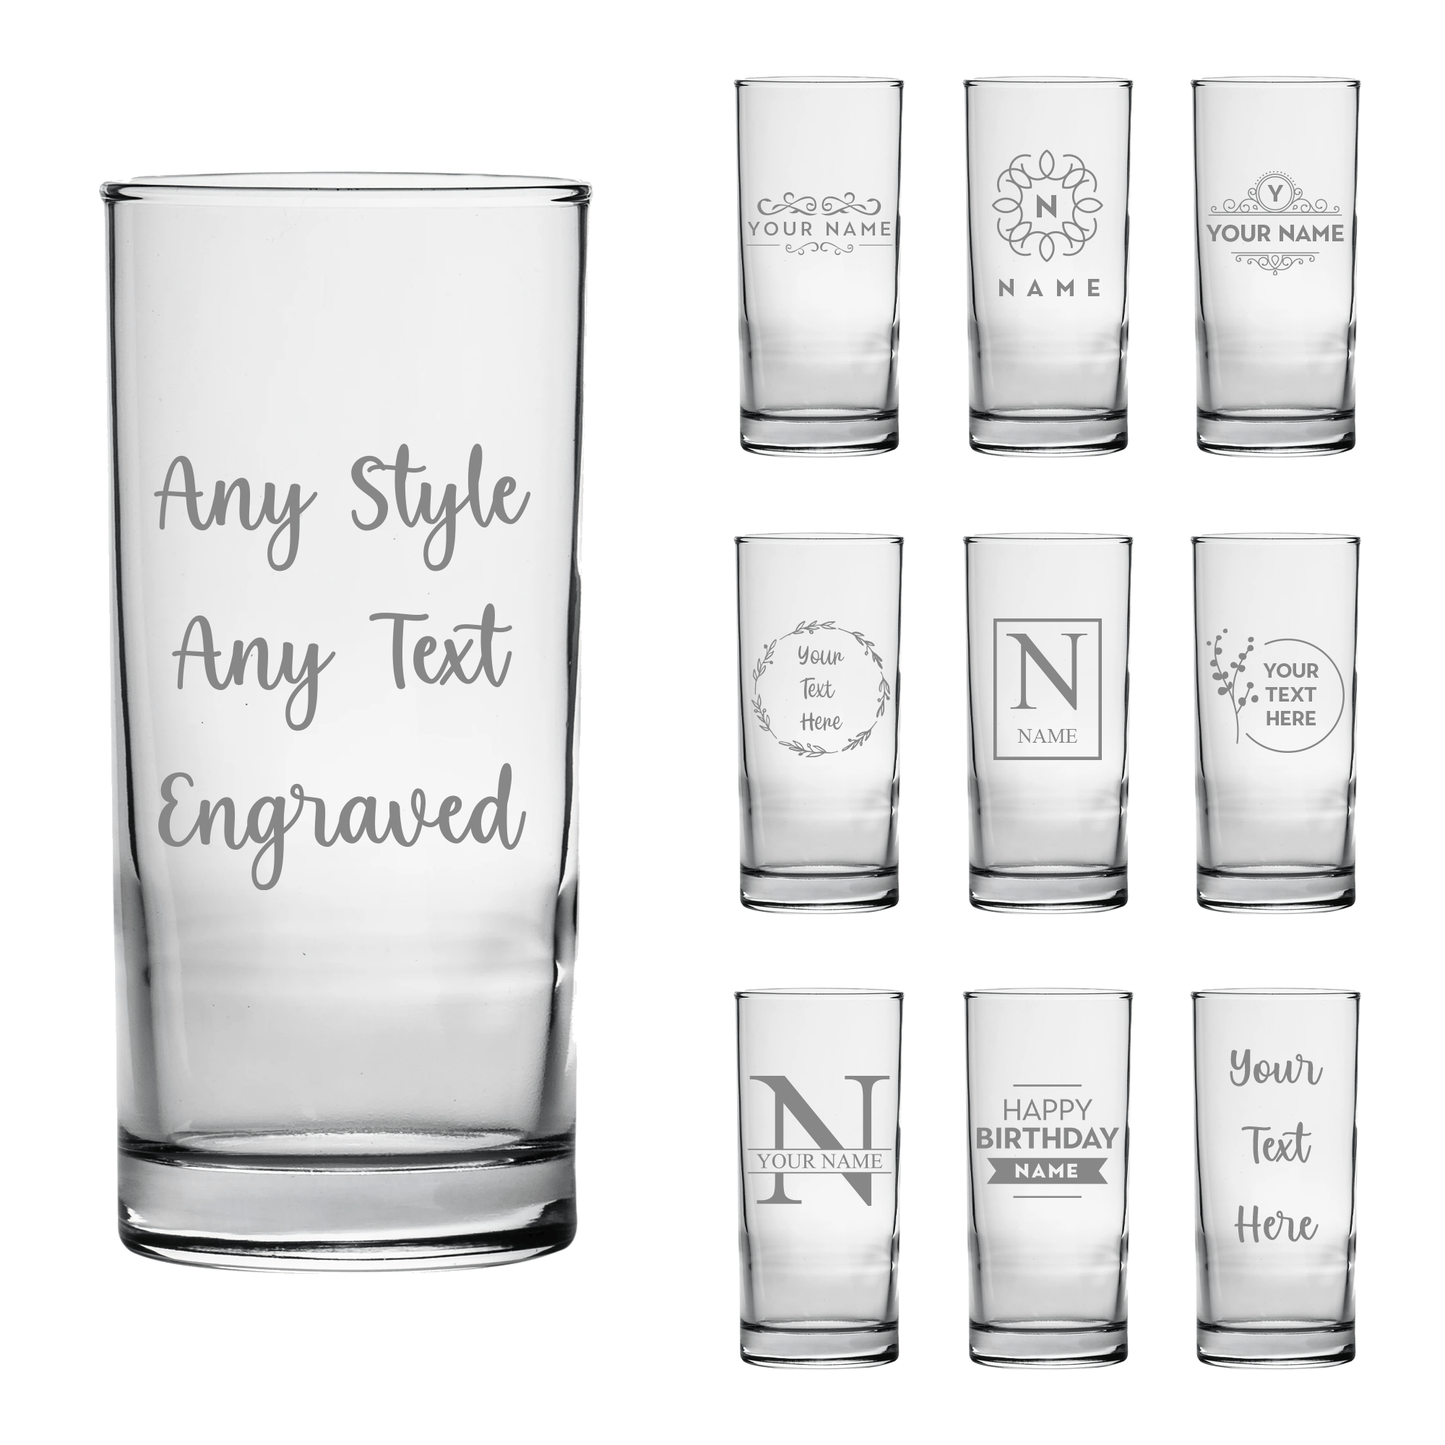 Personalised Engraved High Ball Glass - So Bespoke Gifts